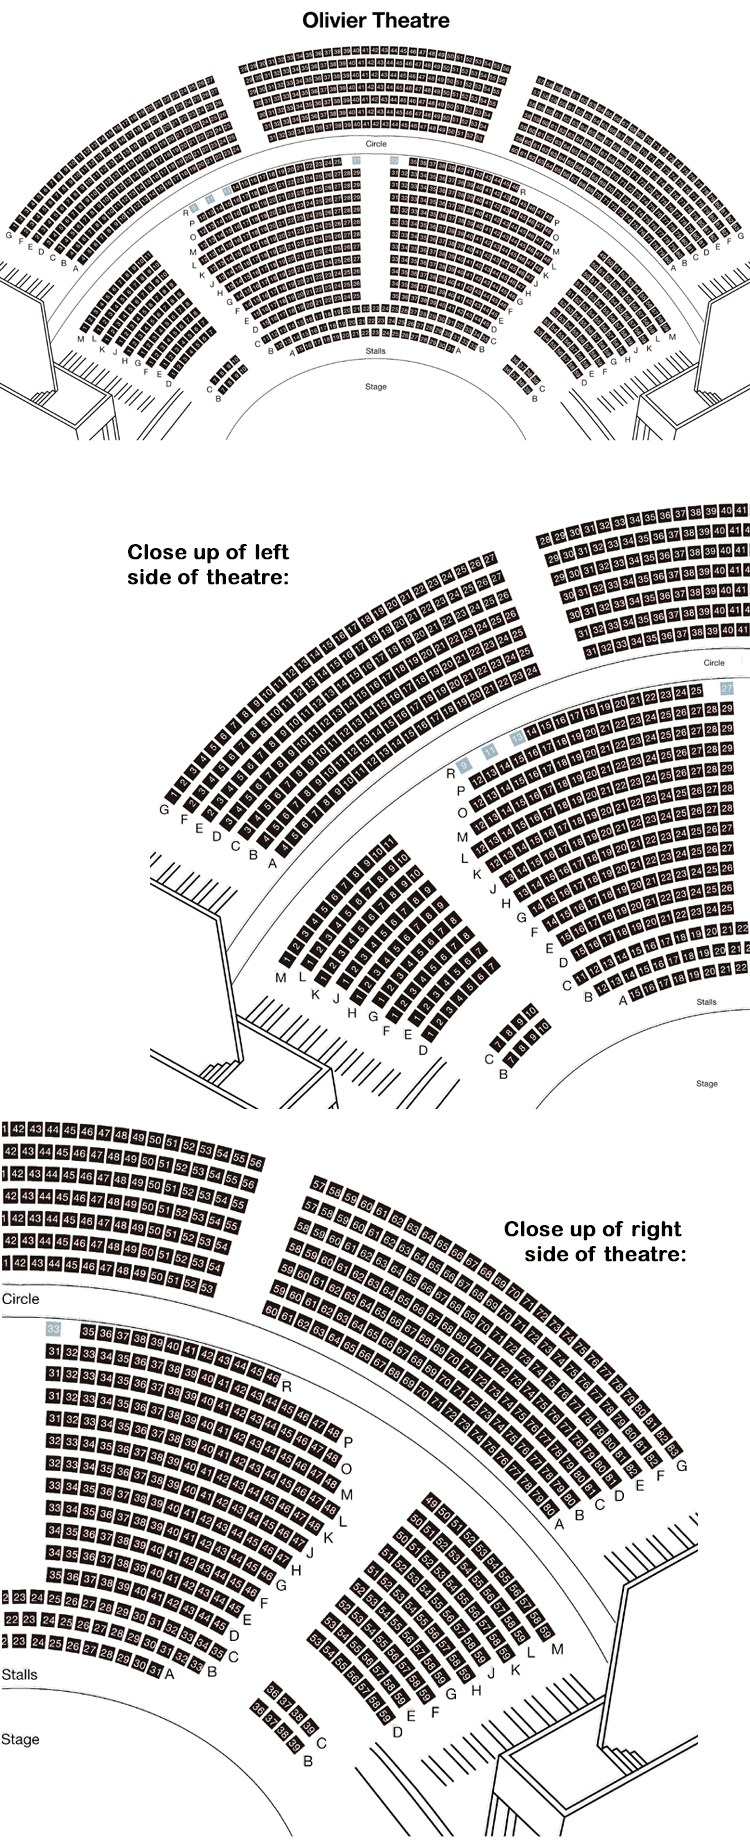 National Theatre (Olivier Theatre) Seating Plan